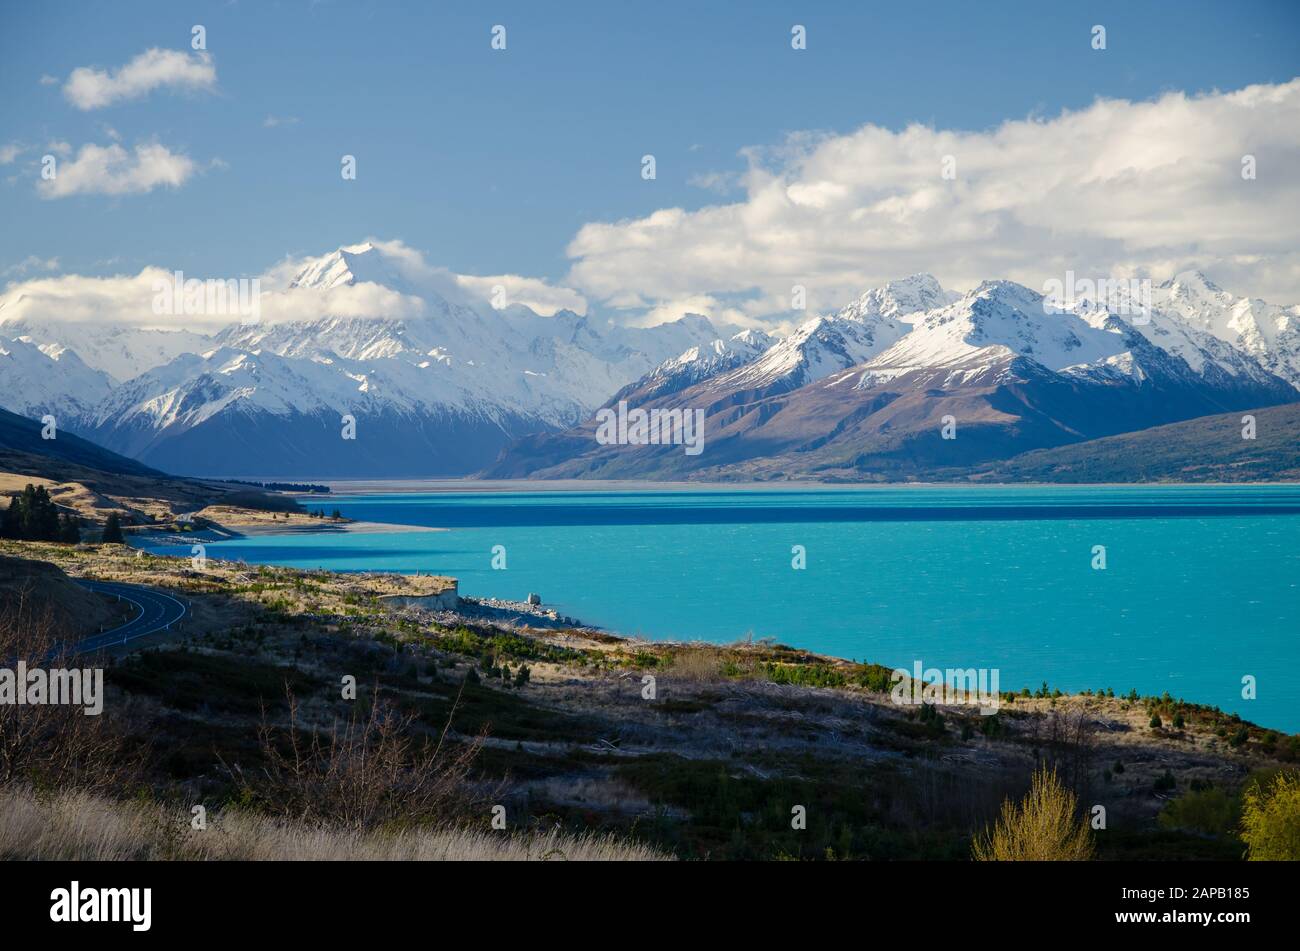 Snow covered Mount Cook with Lake Pukaki in the foreground and blue sky and white clouds, South Island, New Zealand Stock Photo